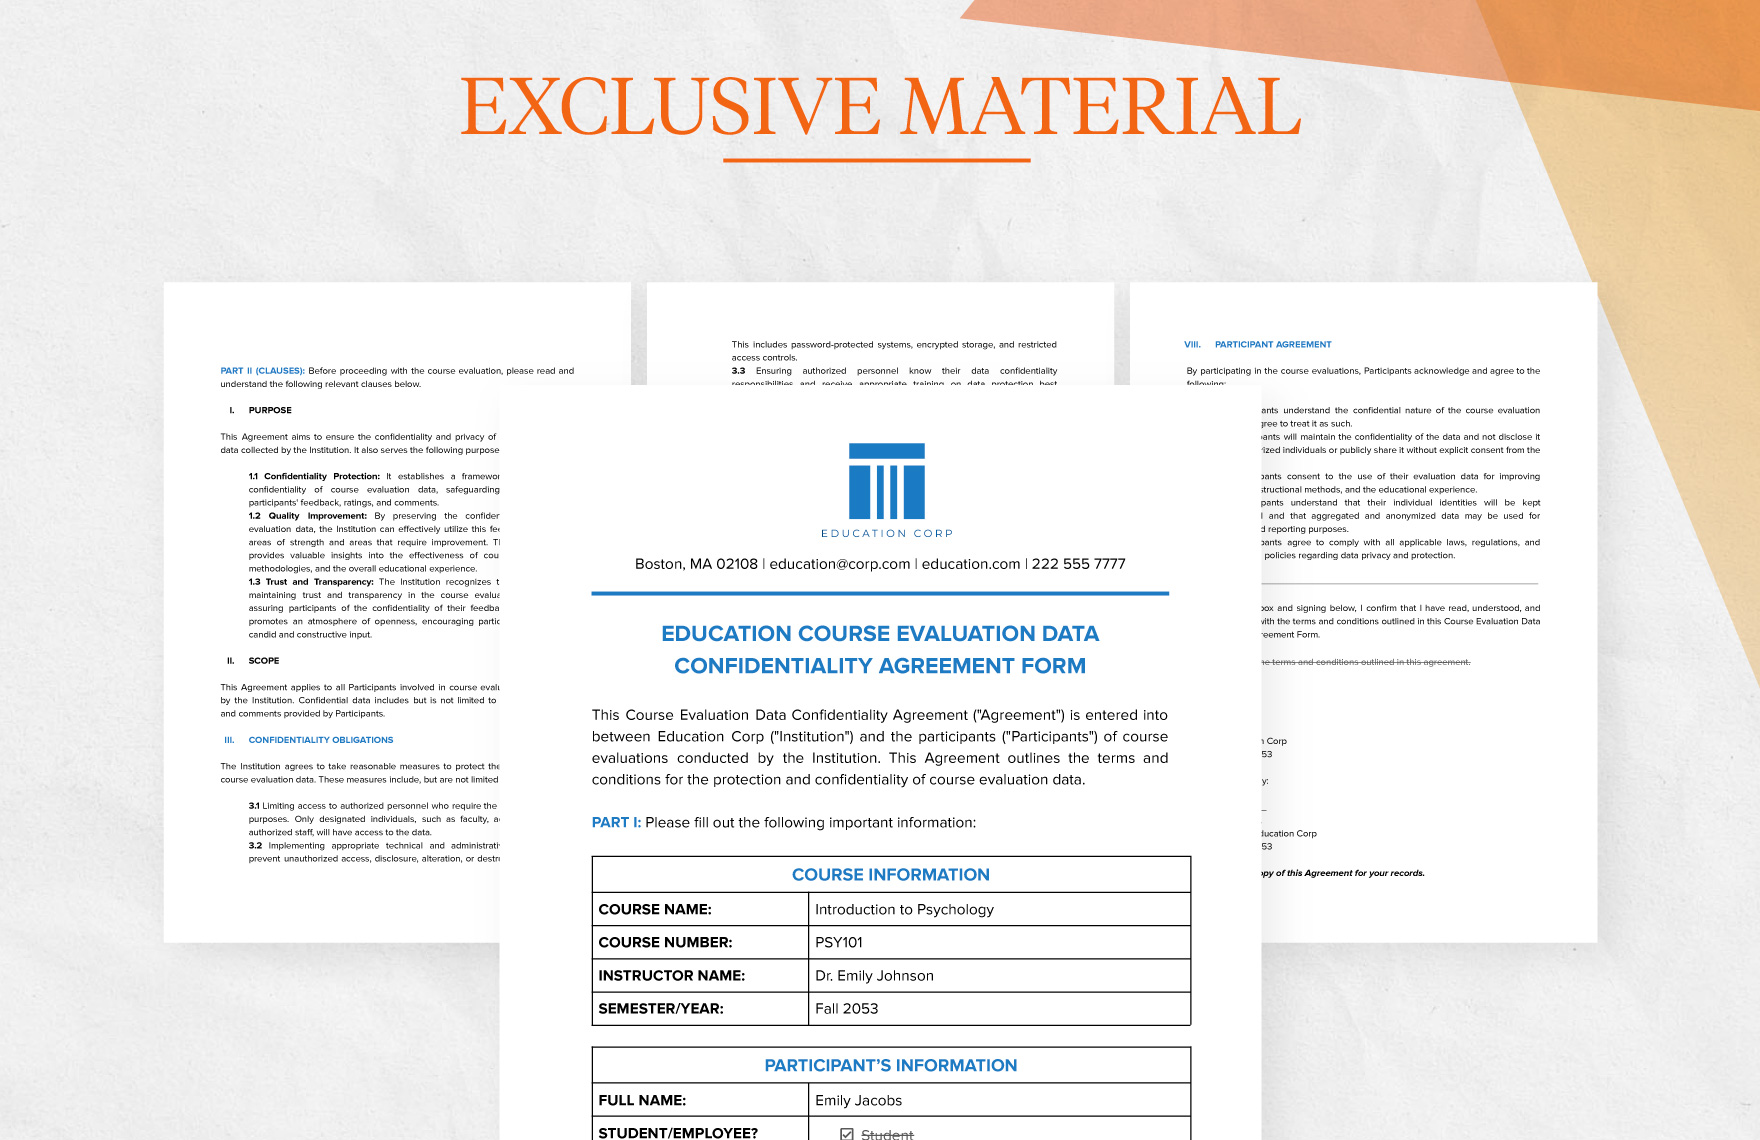 Education Course Evaluation Data Confidentiality Agreement Form Template